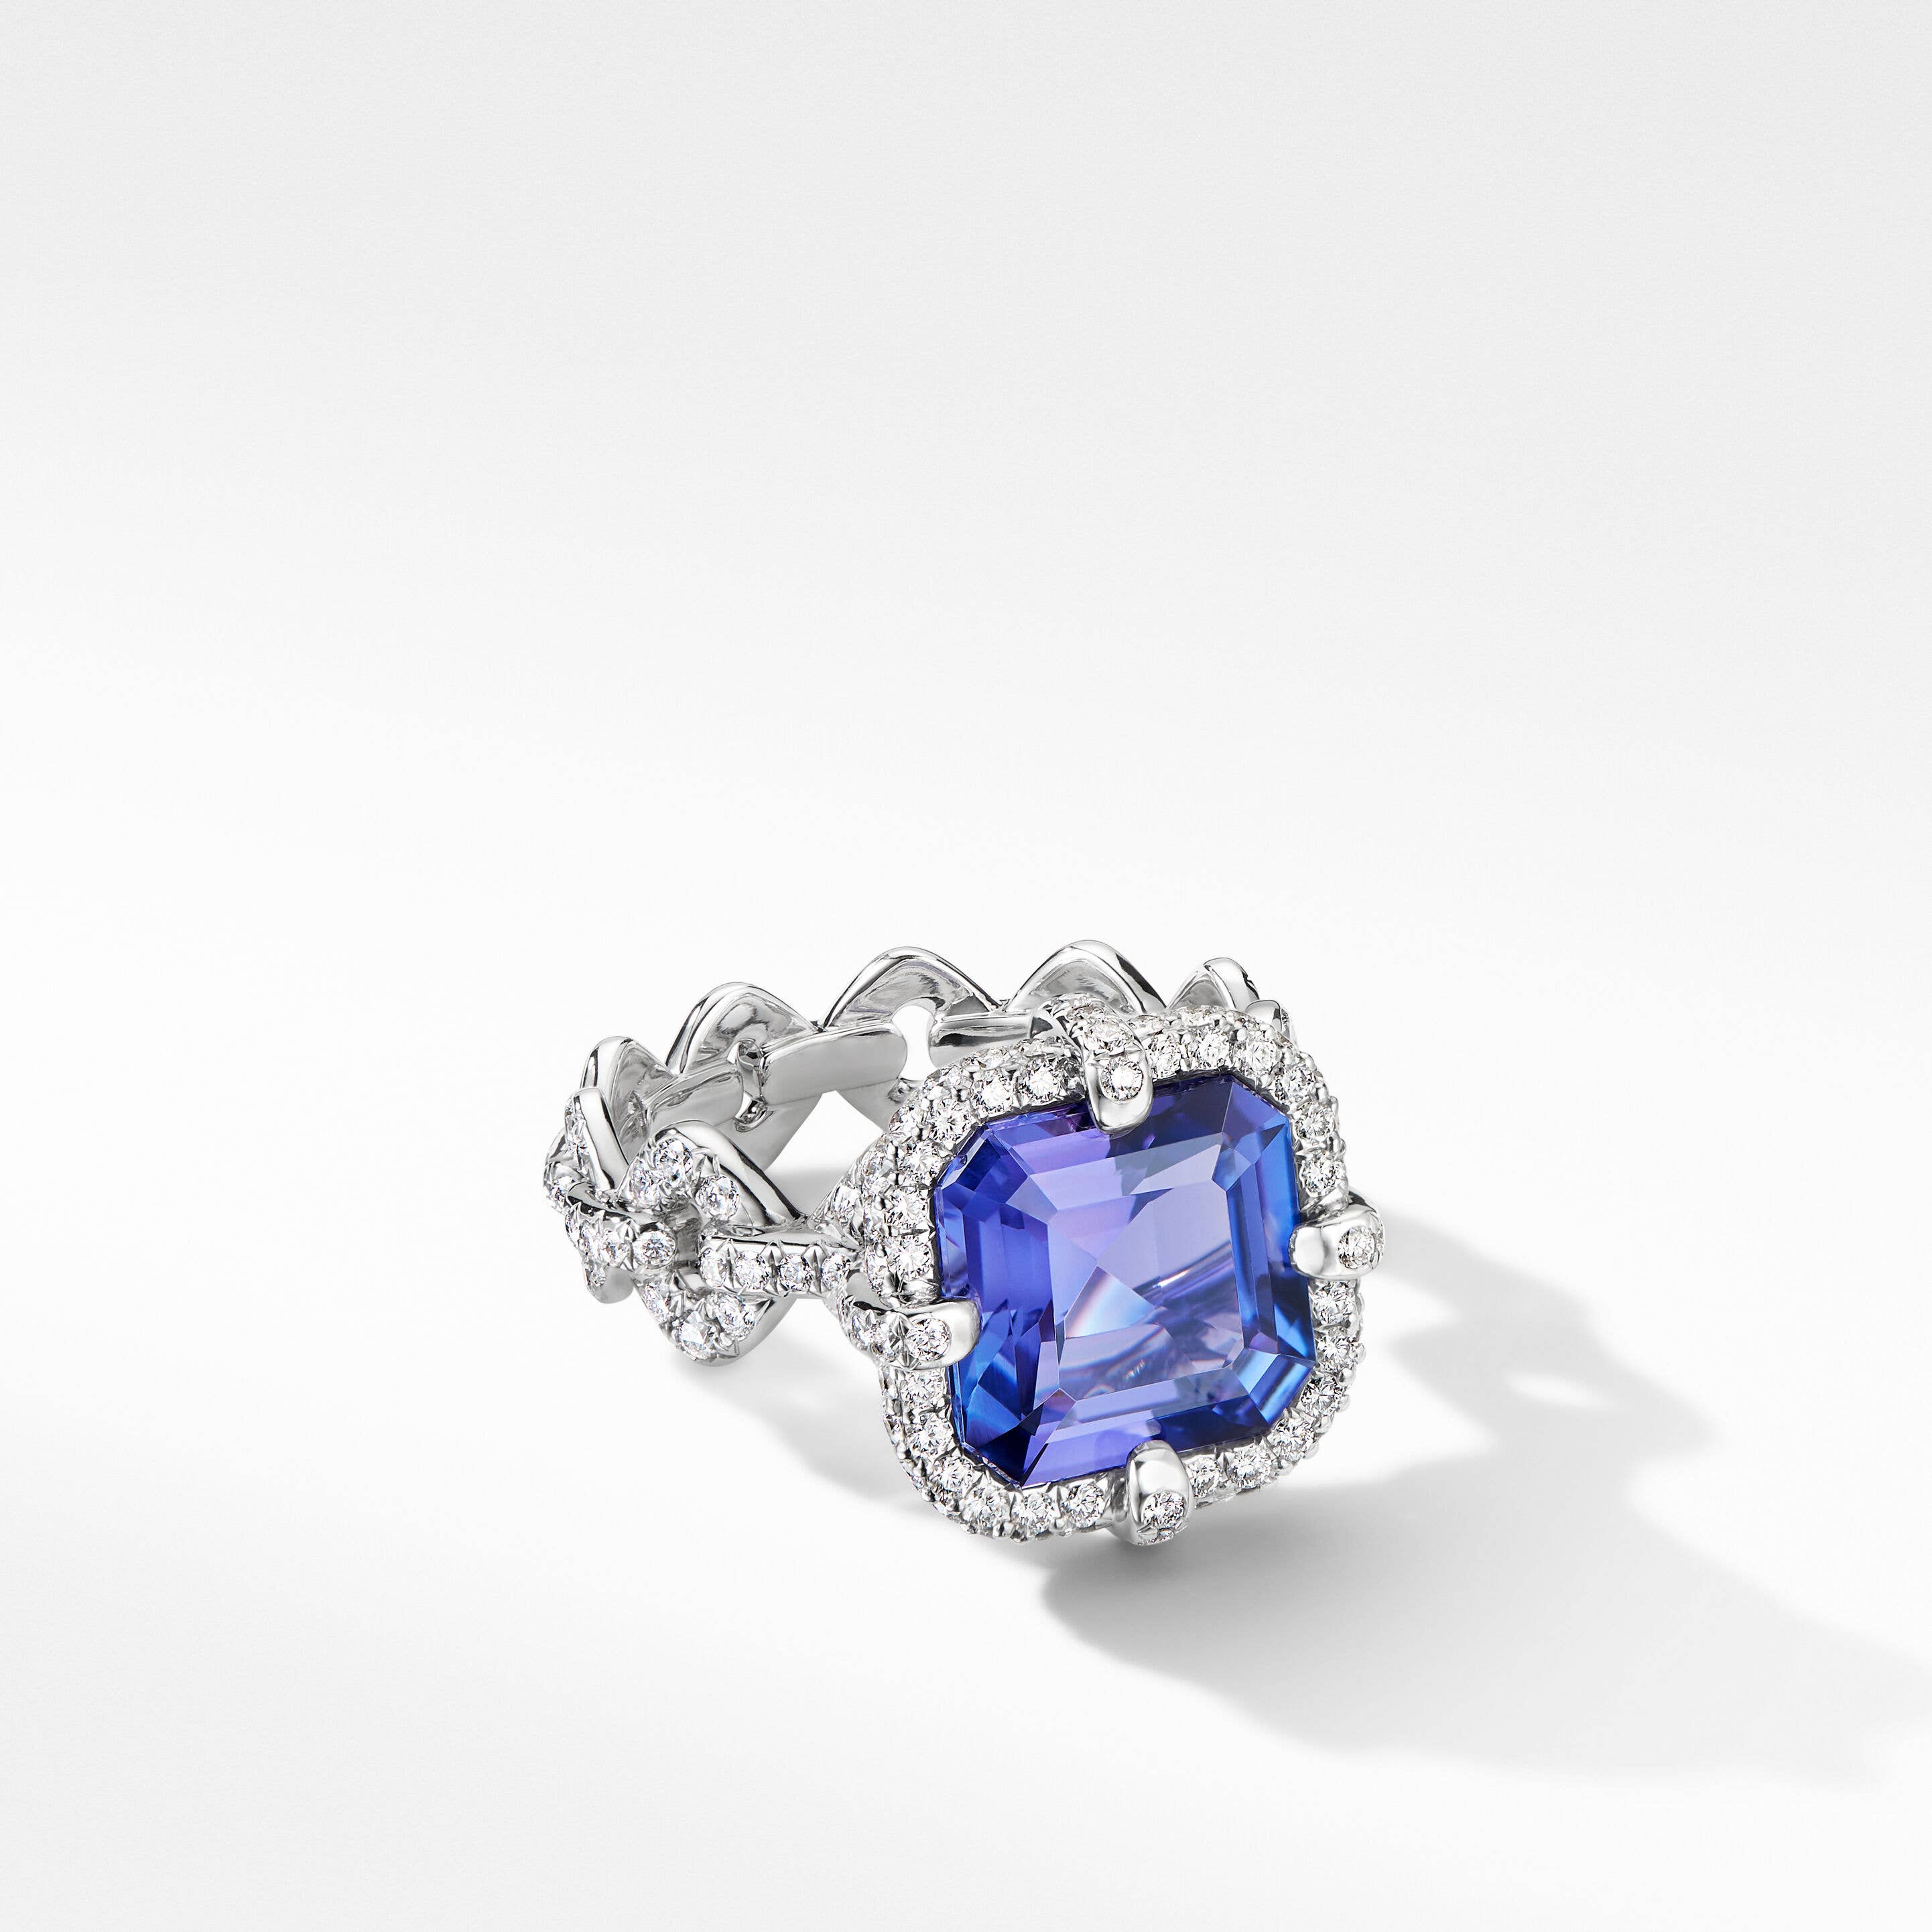 DY Lumina Cushion Ring in White Gold with Tanzanite and Diamonds